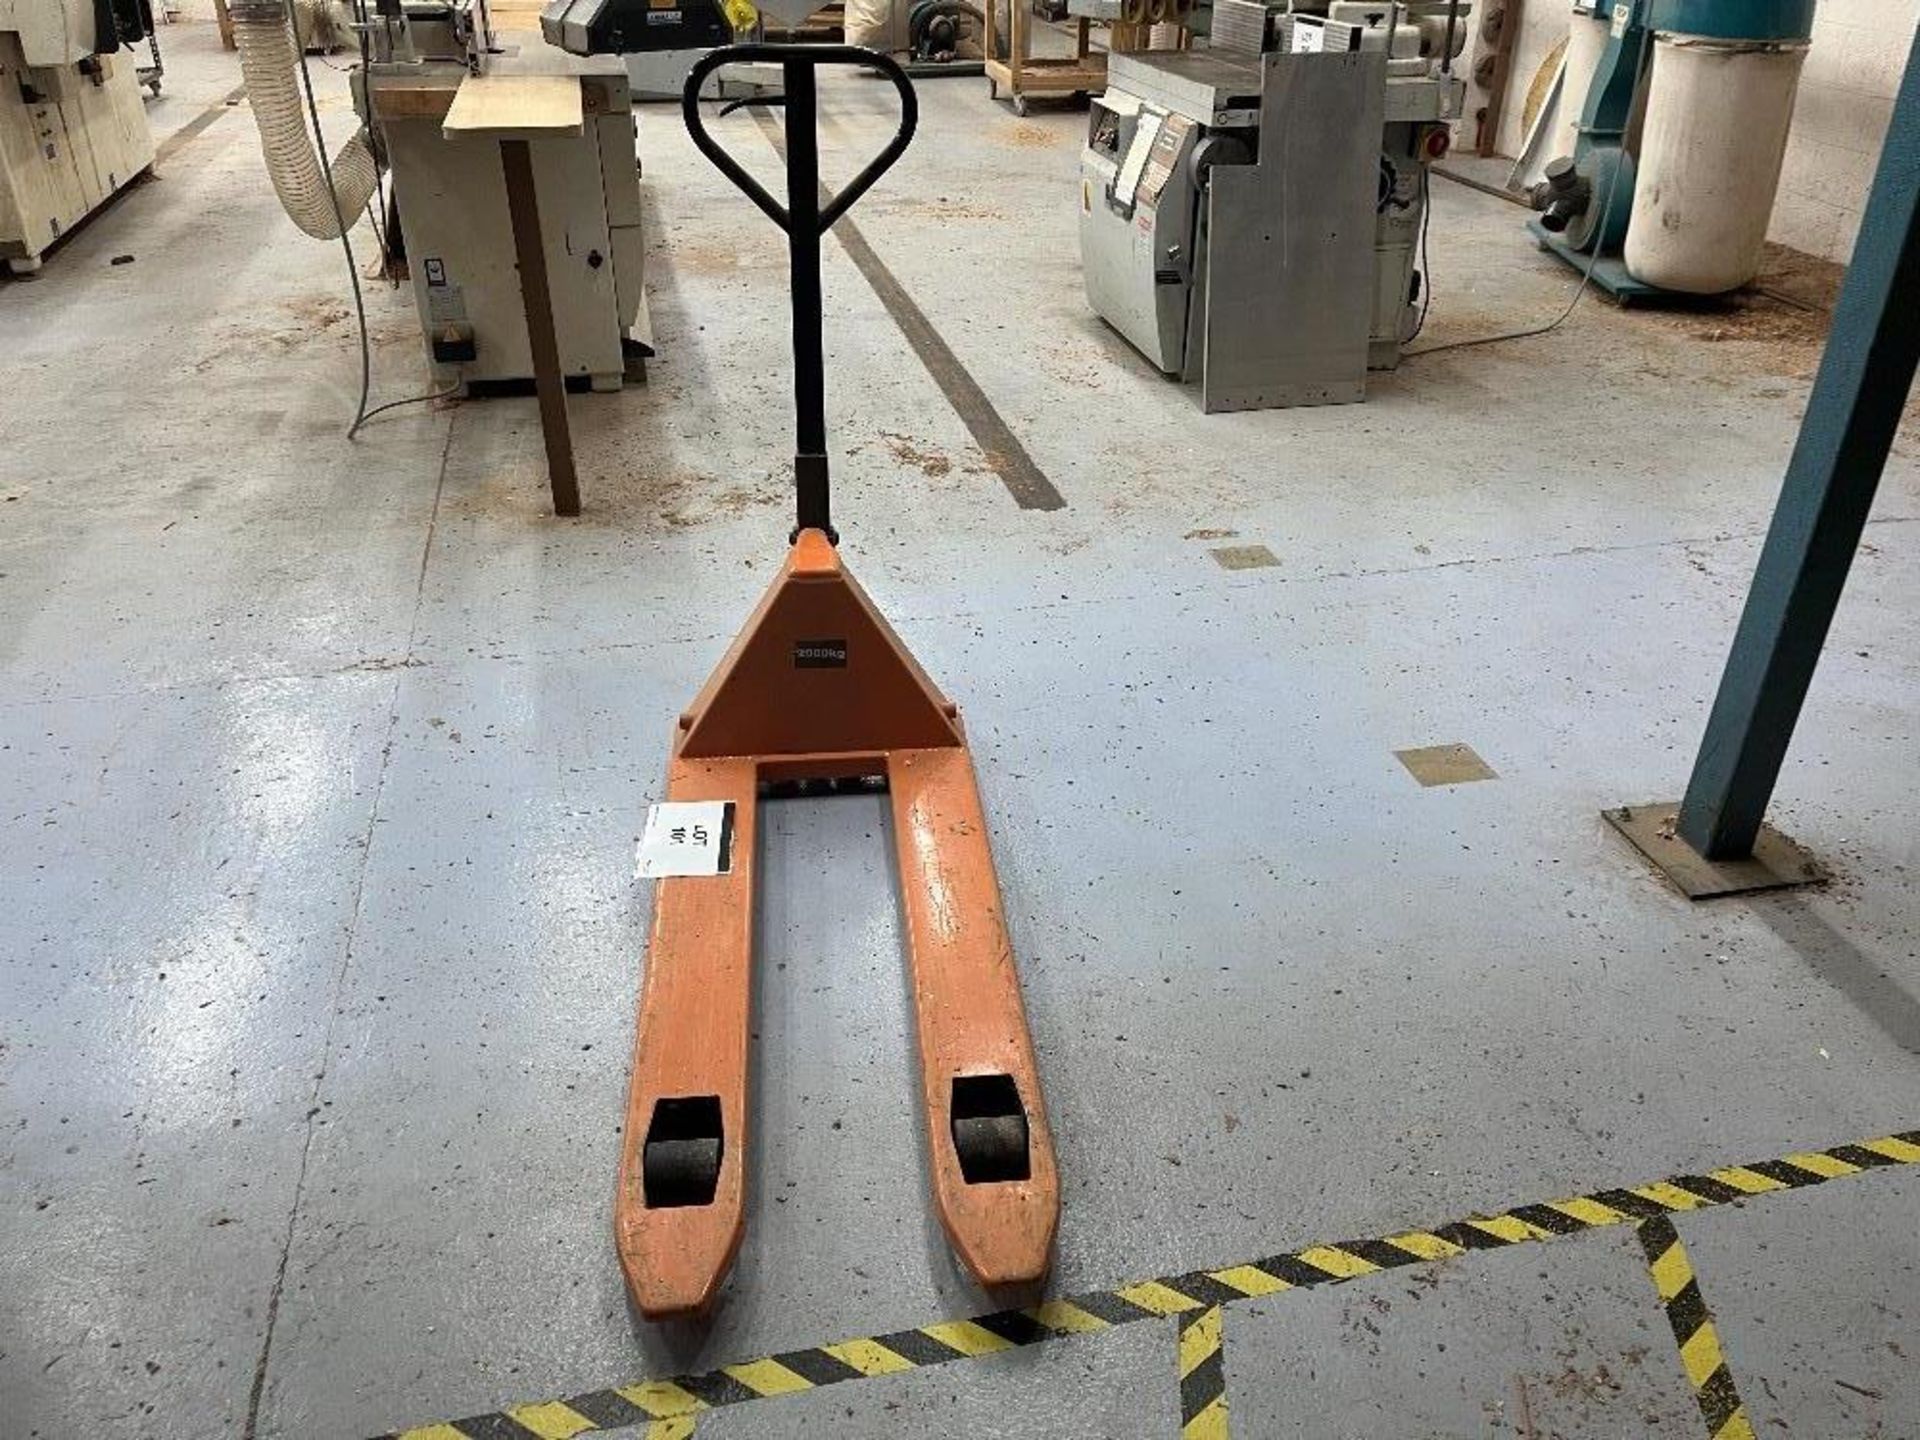 2t pallet truck - Image 2 of 3